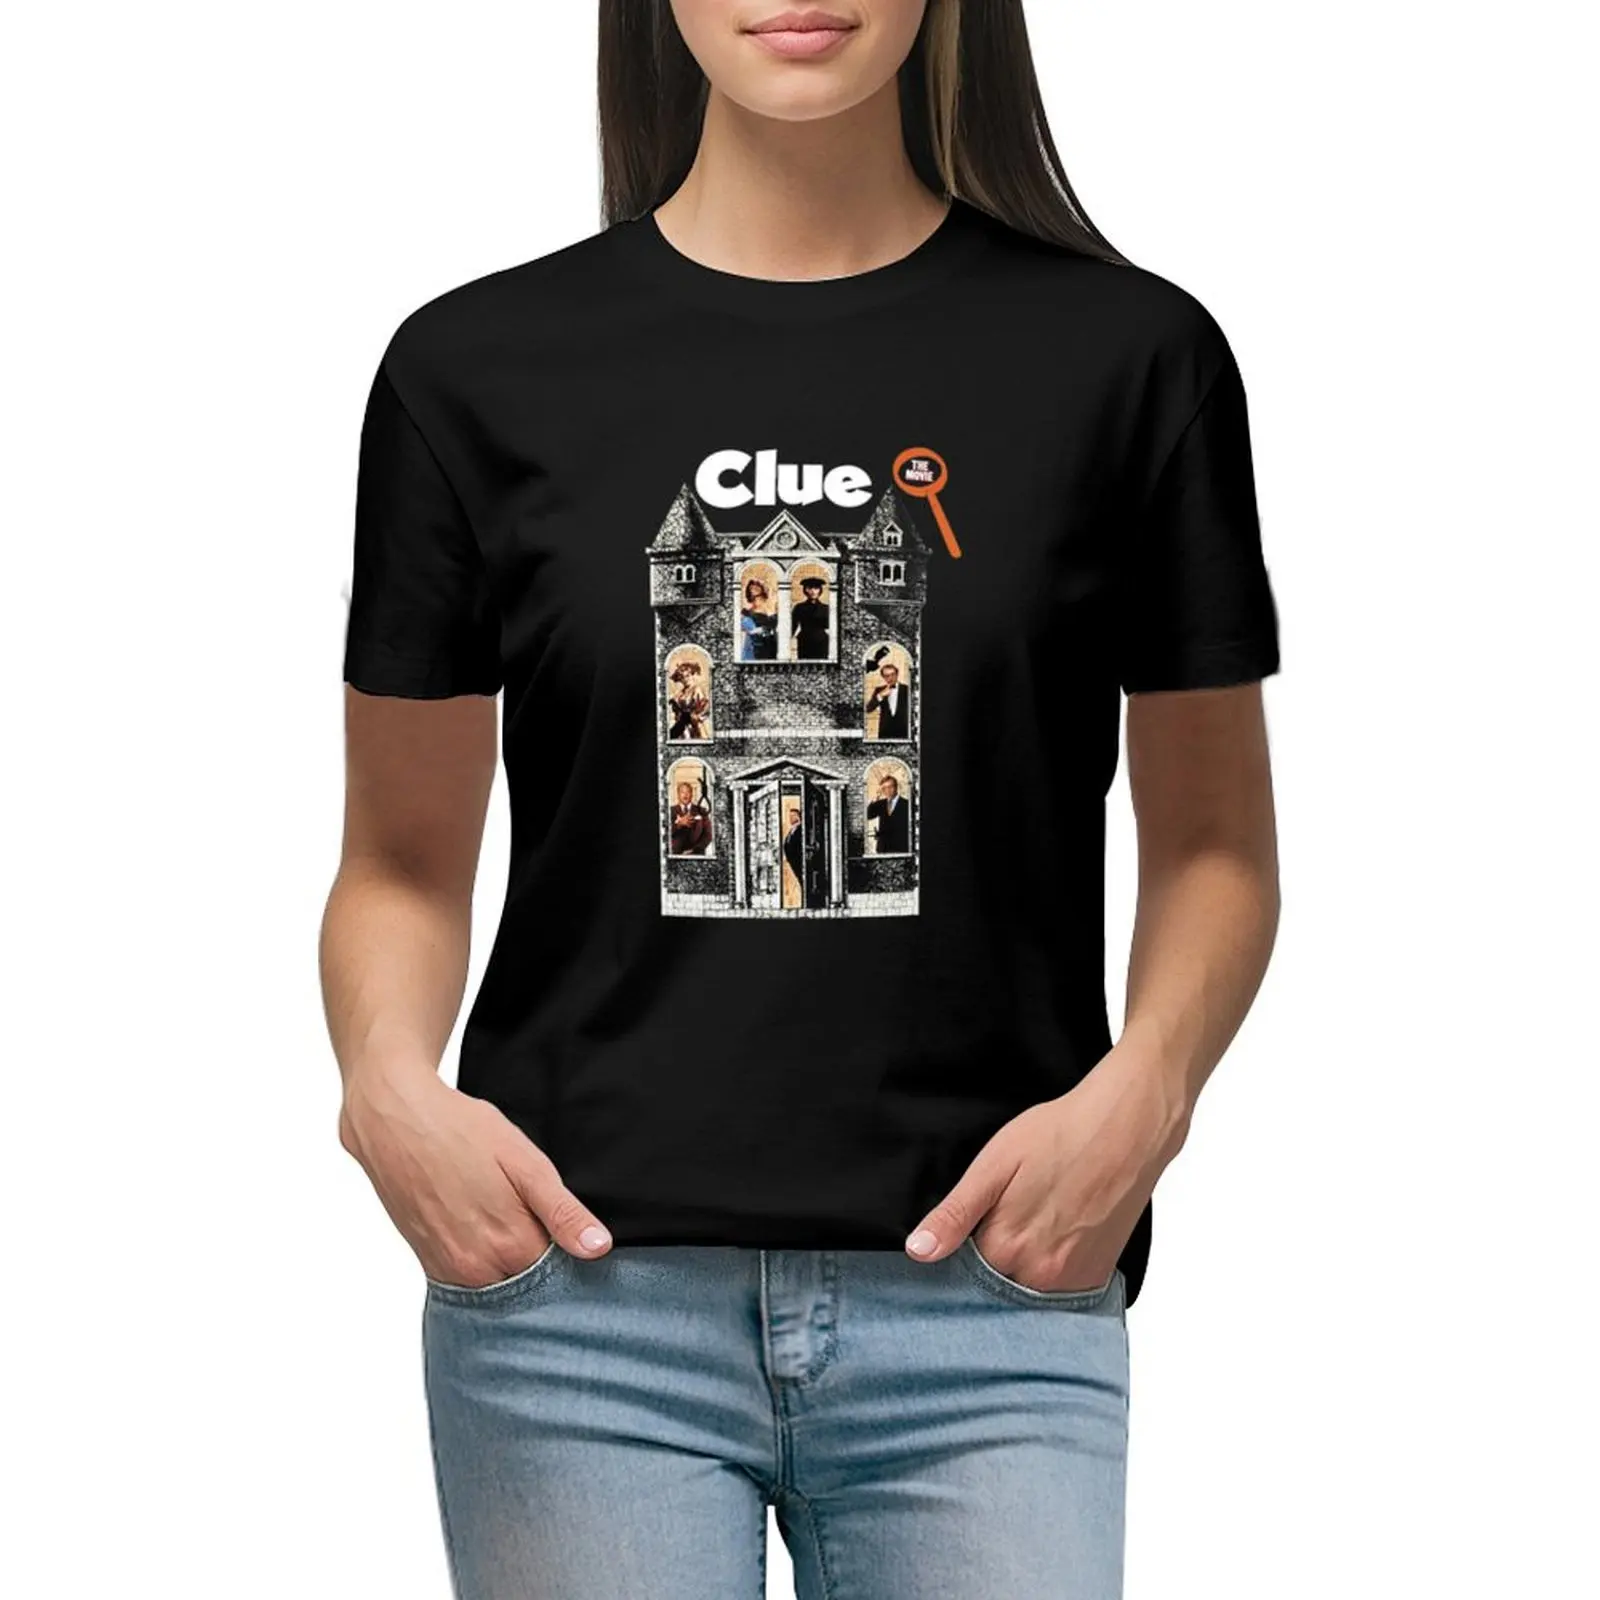 

Clue Movie T-shirt lady clothes graphics vintage clothes cute t-shirts for Women